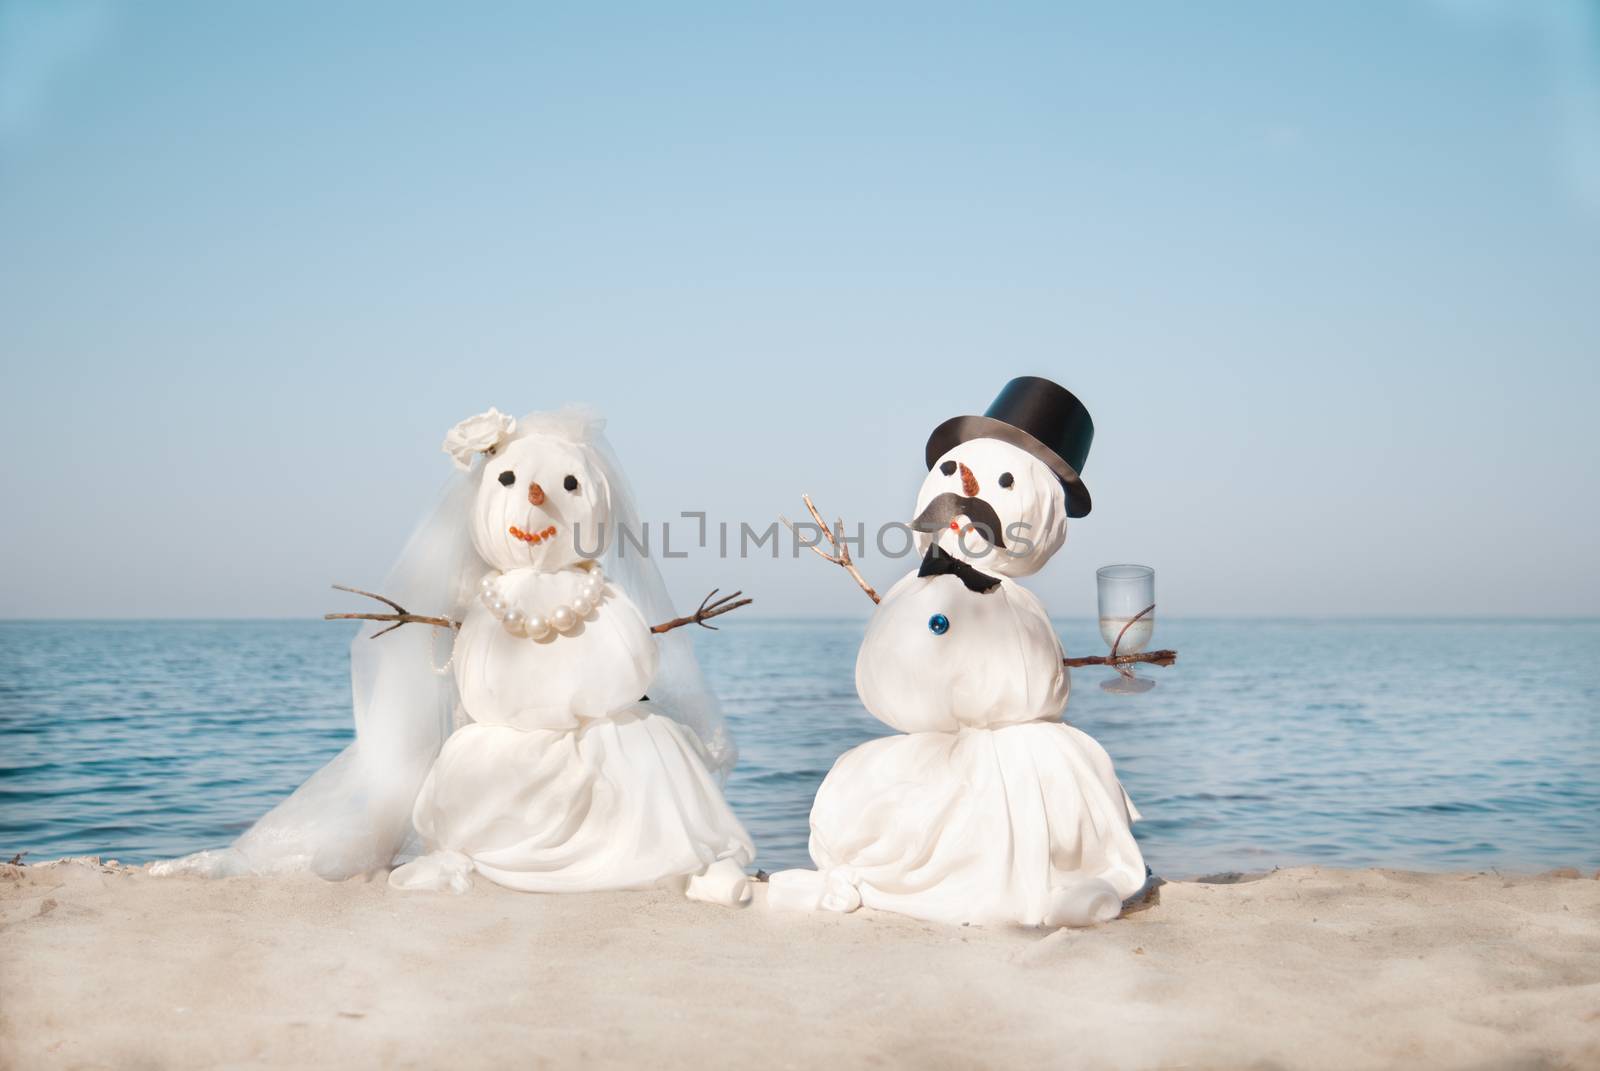 Two Snowmen at the sea by Nickolya